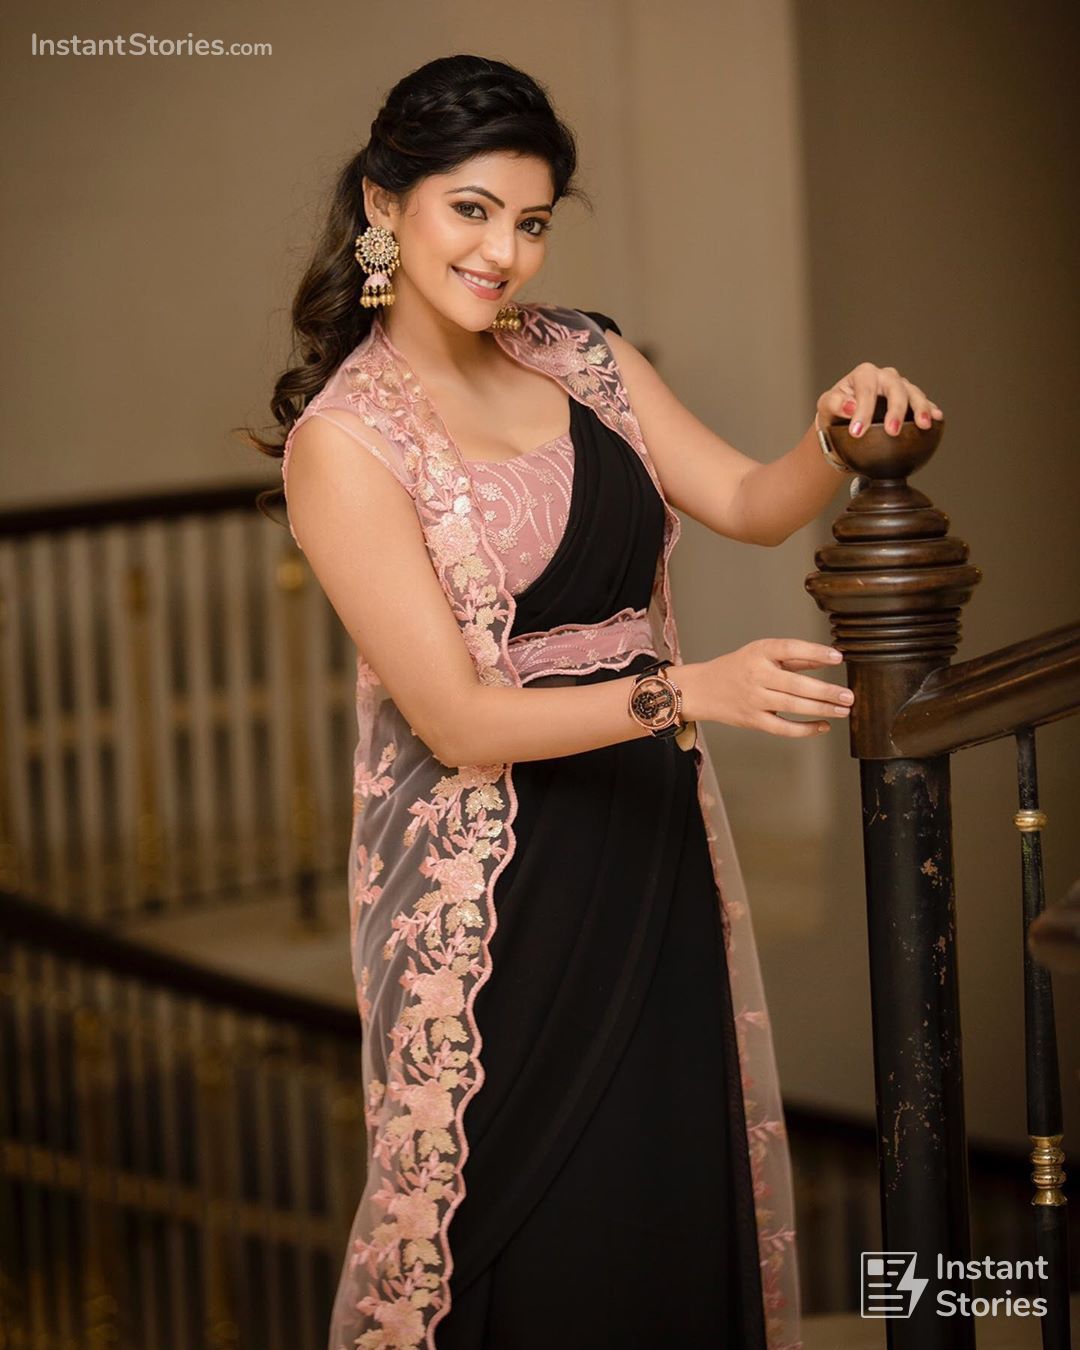 Athulya Ravi Hot Photoshoot Pictures/Wallpapers in HD Quality (1080p) (444) - Athulya Ravi